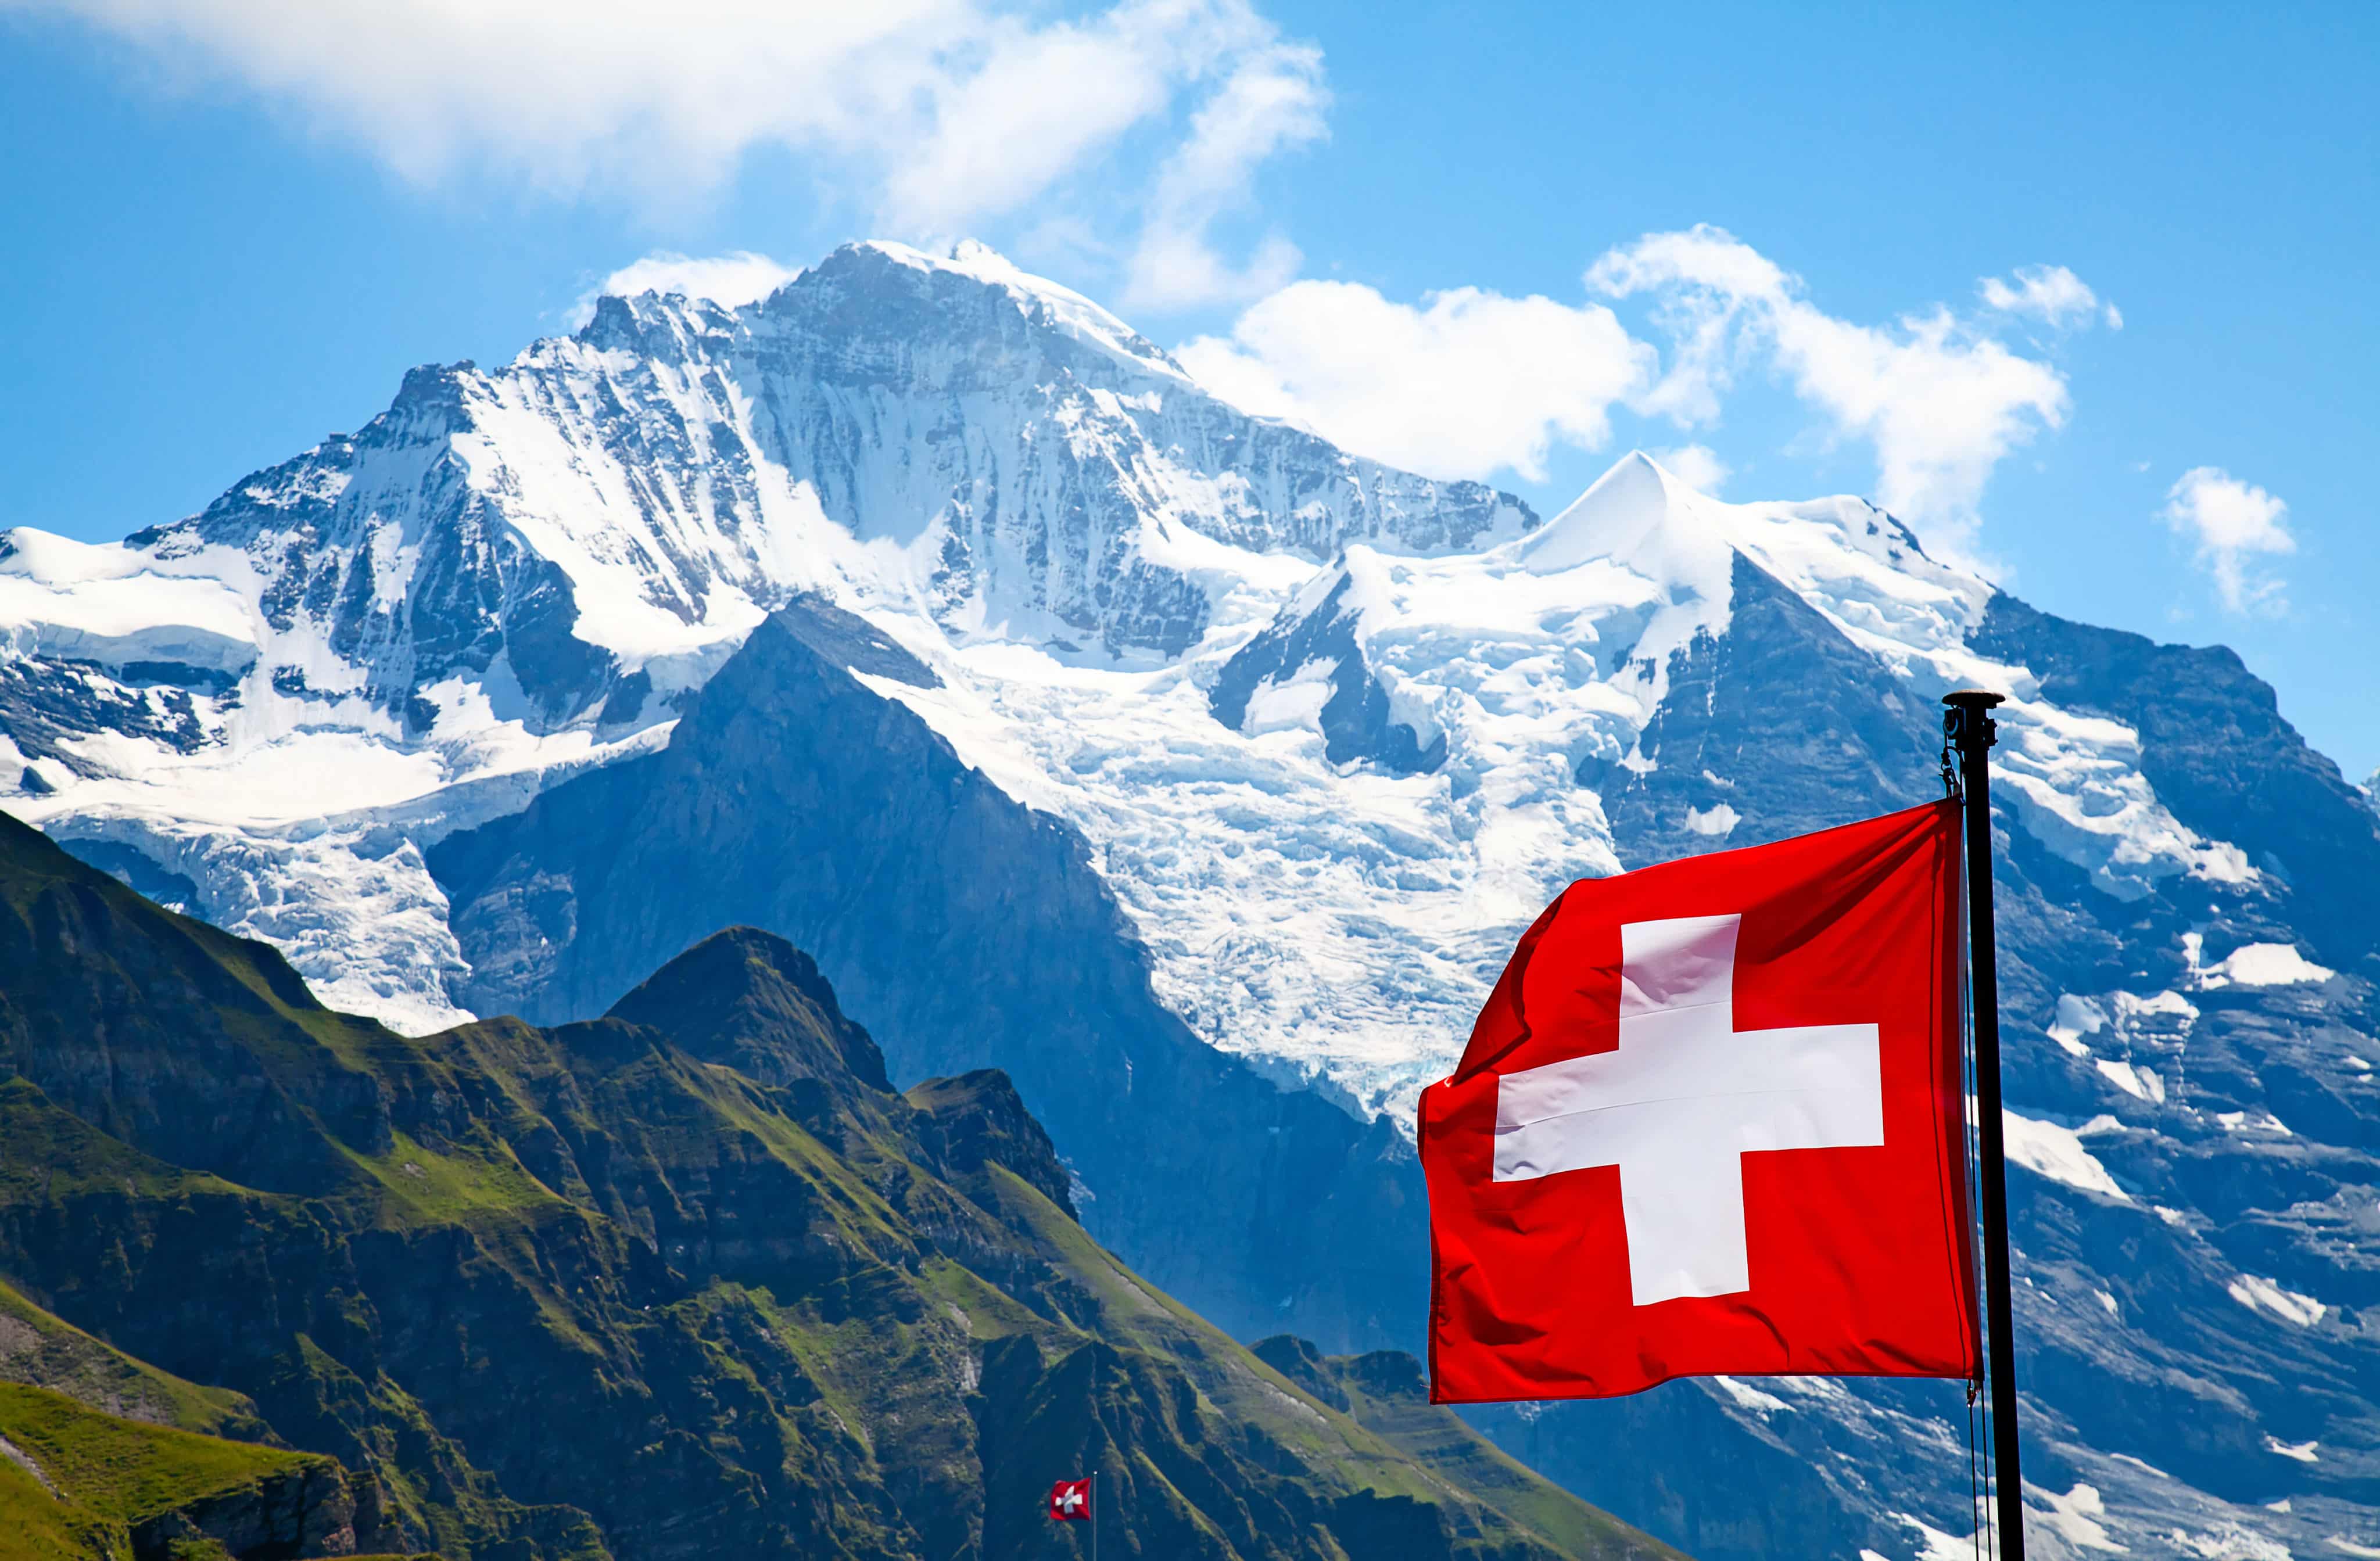 Switzerland Medical Cannabis Law Goes Live August 1